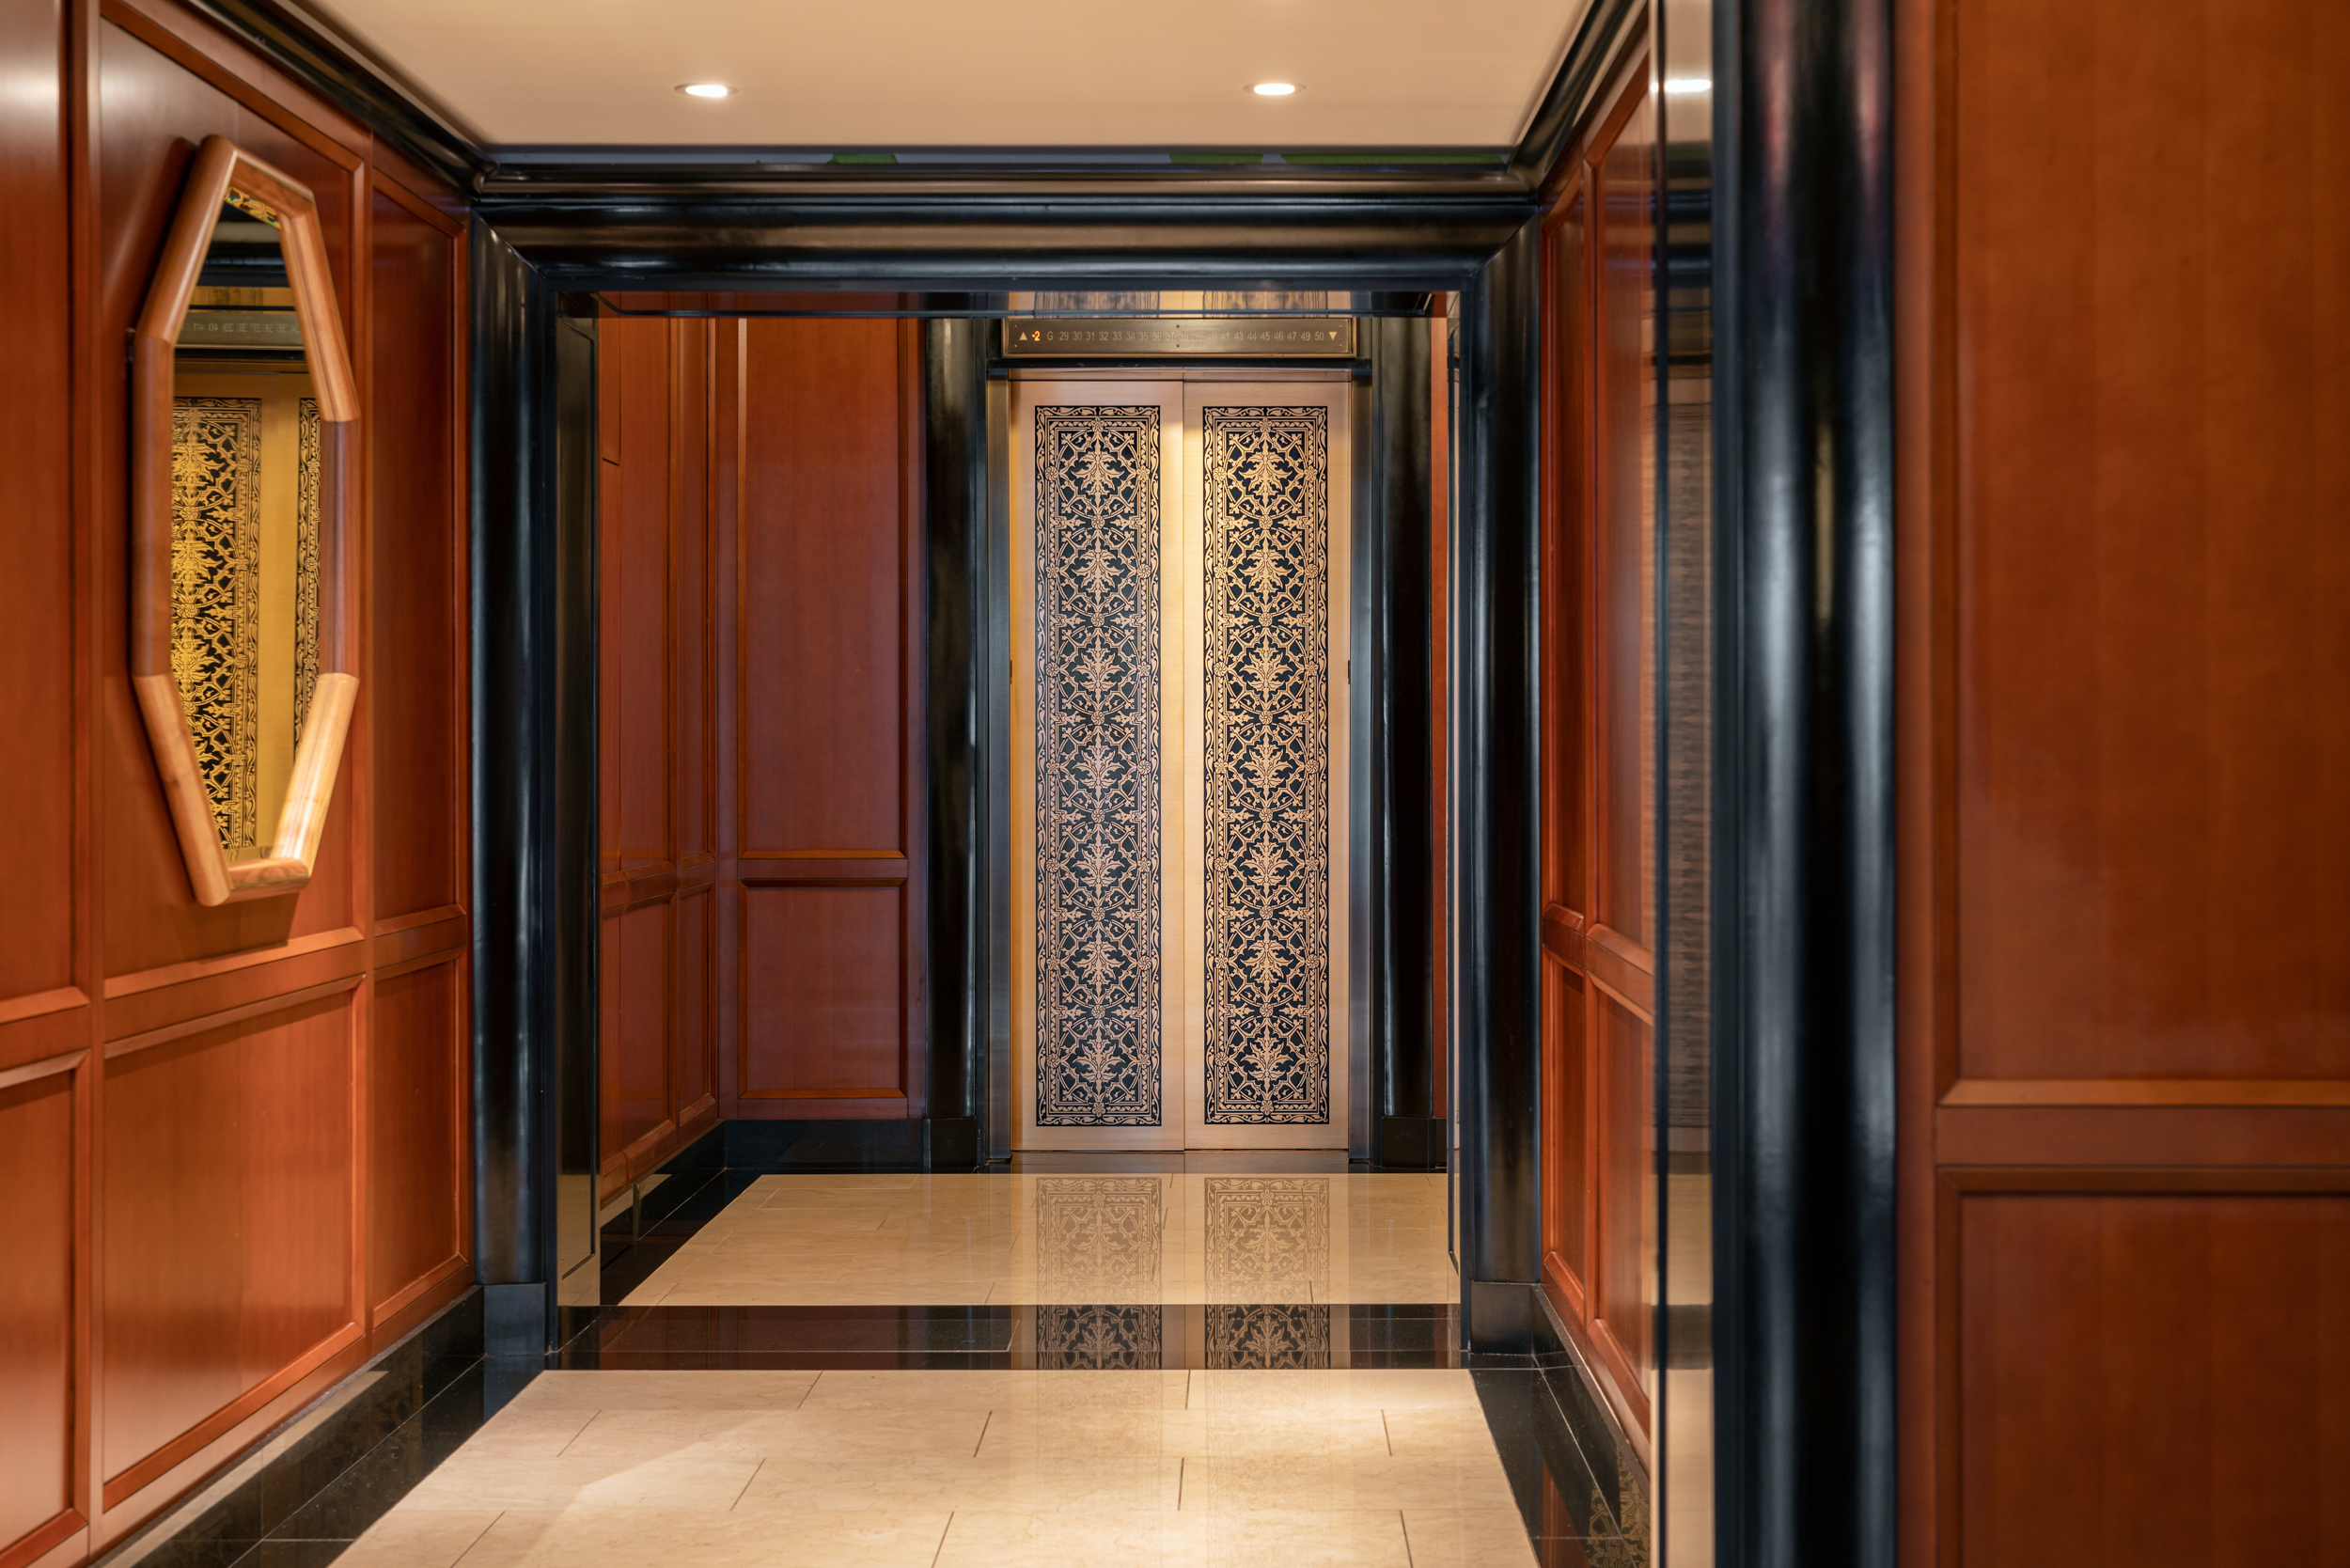 Elevator lobby at the Woolworth Tower condos in New York. Dark wood walls with black finishings and a gold elevator gate.